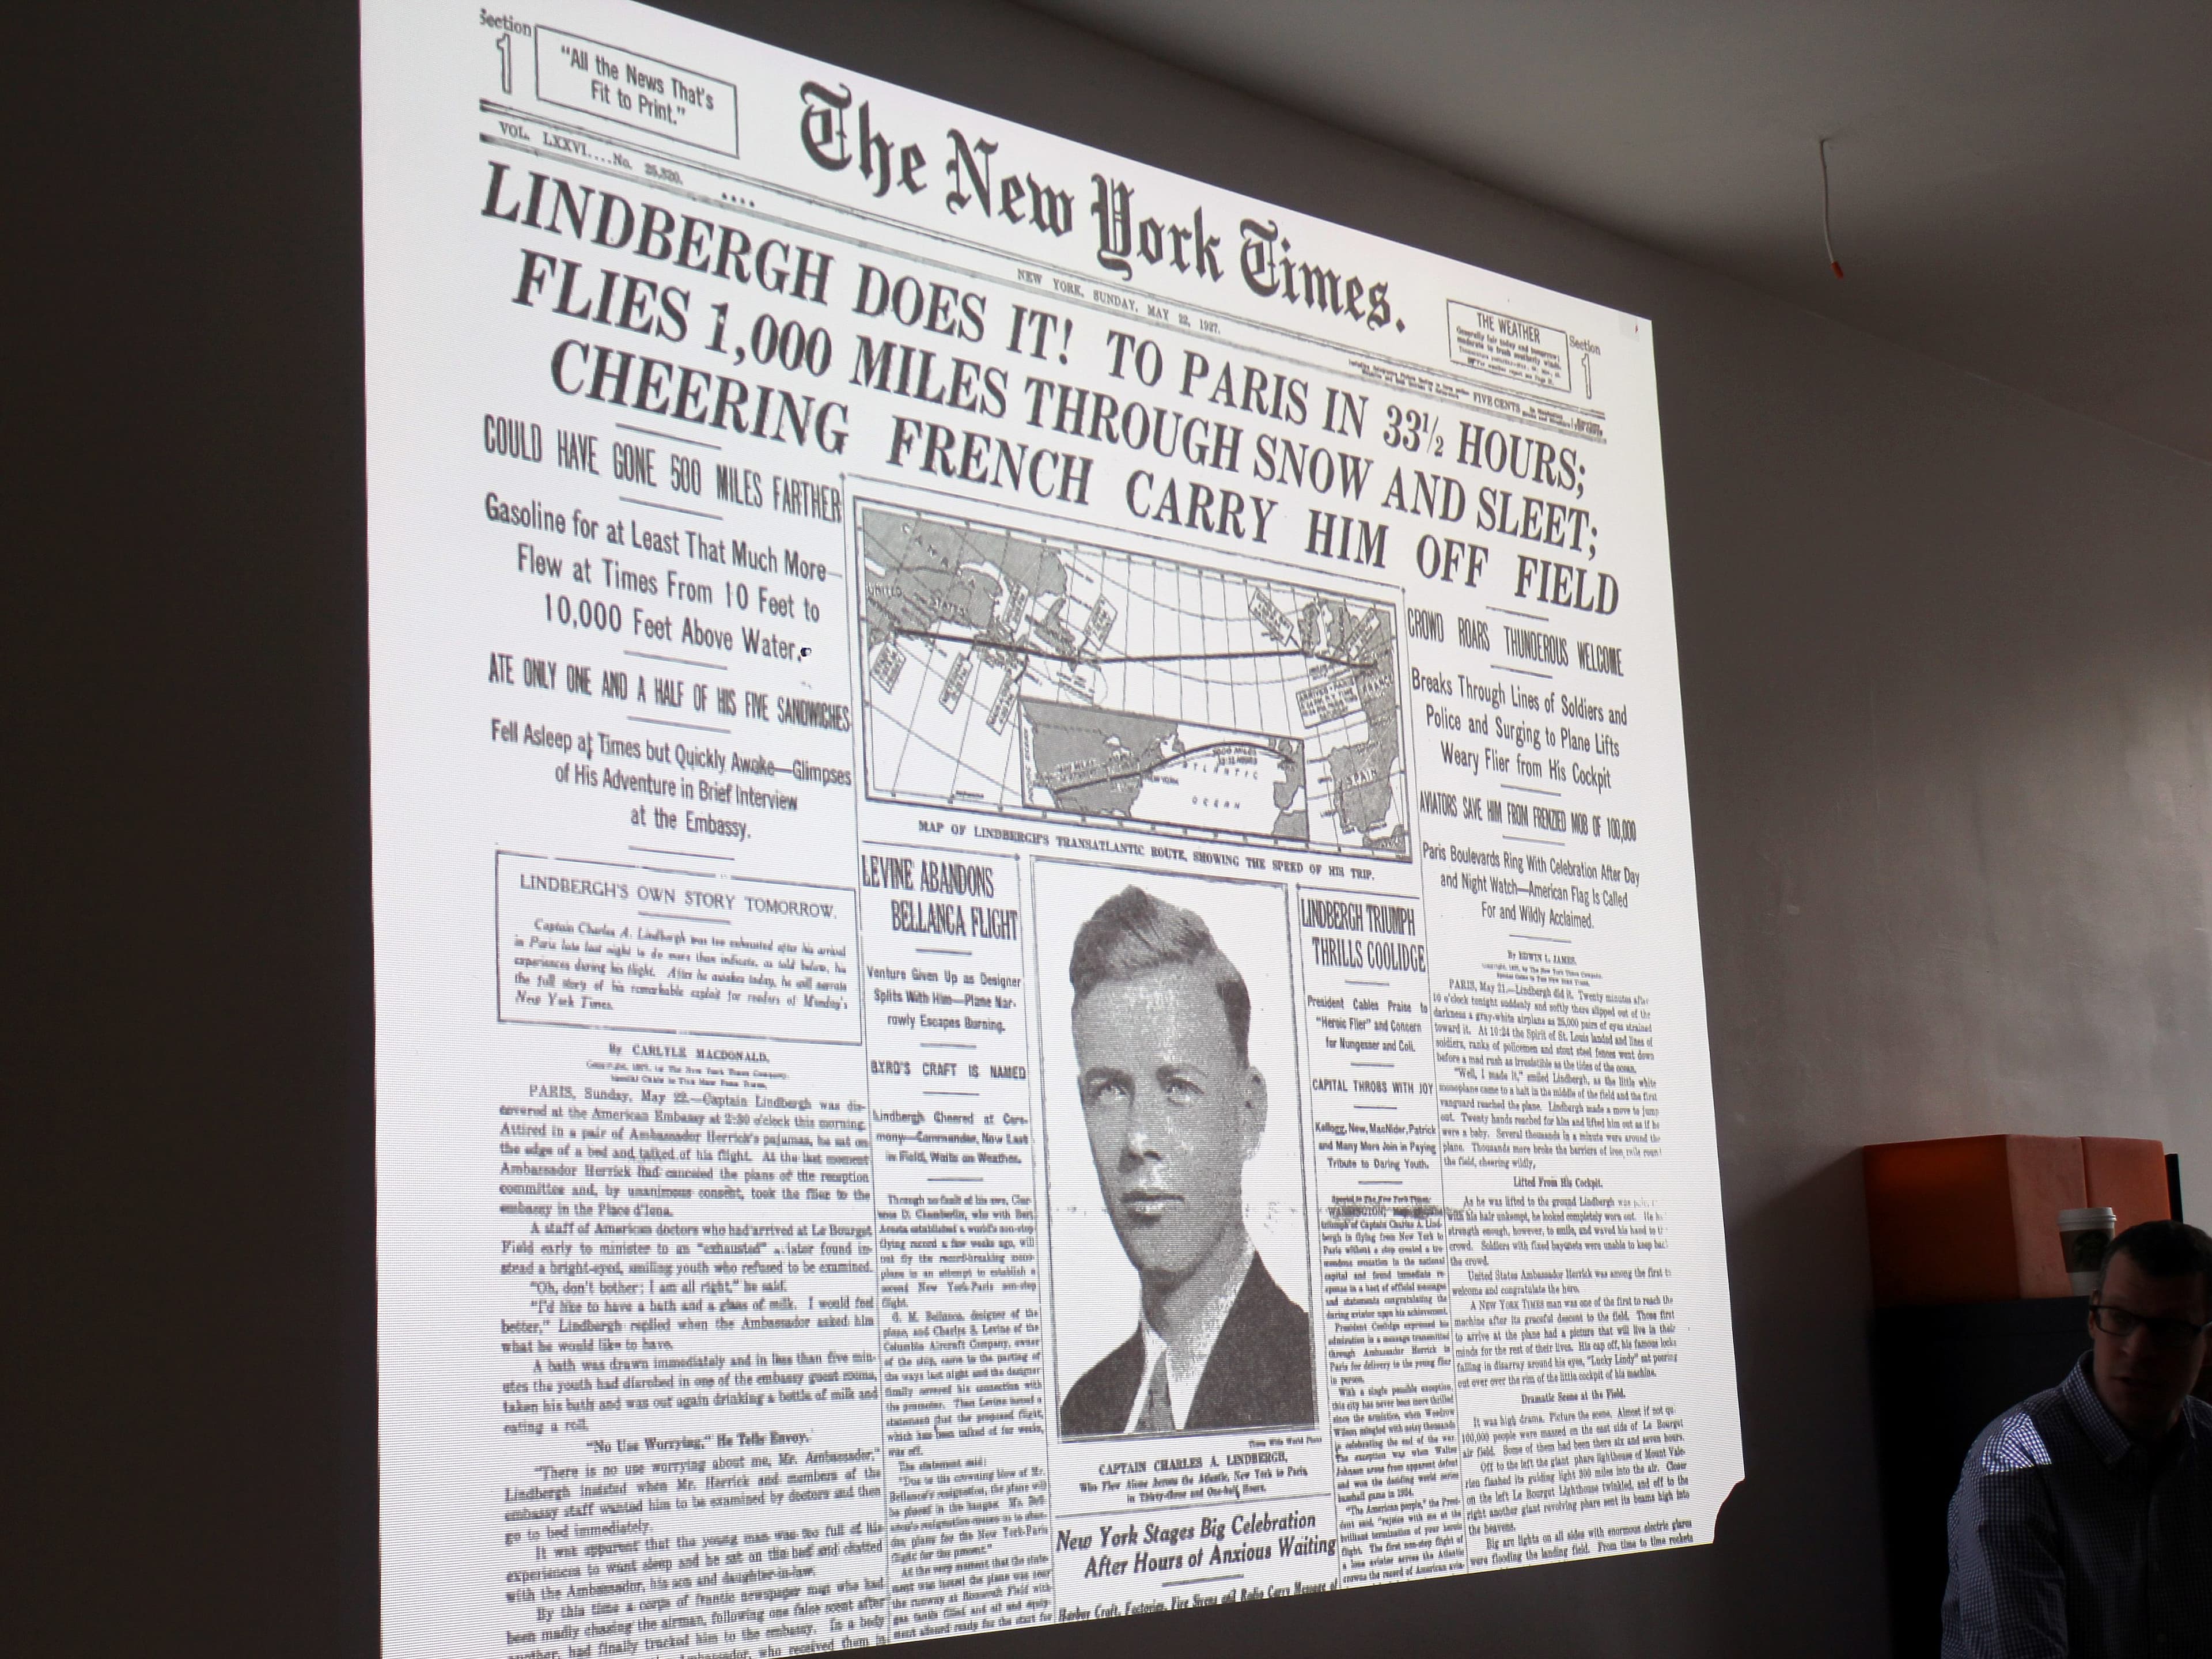 A projected image of a historical New York Times front page featuring Charles Lindbergh's transatlantic flight. The headline reads "Lindbergh Does It! To Paris in 33½ Hours". A man is partially visible on the right side of the picture.